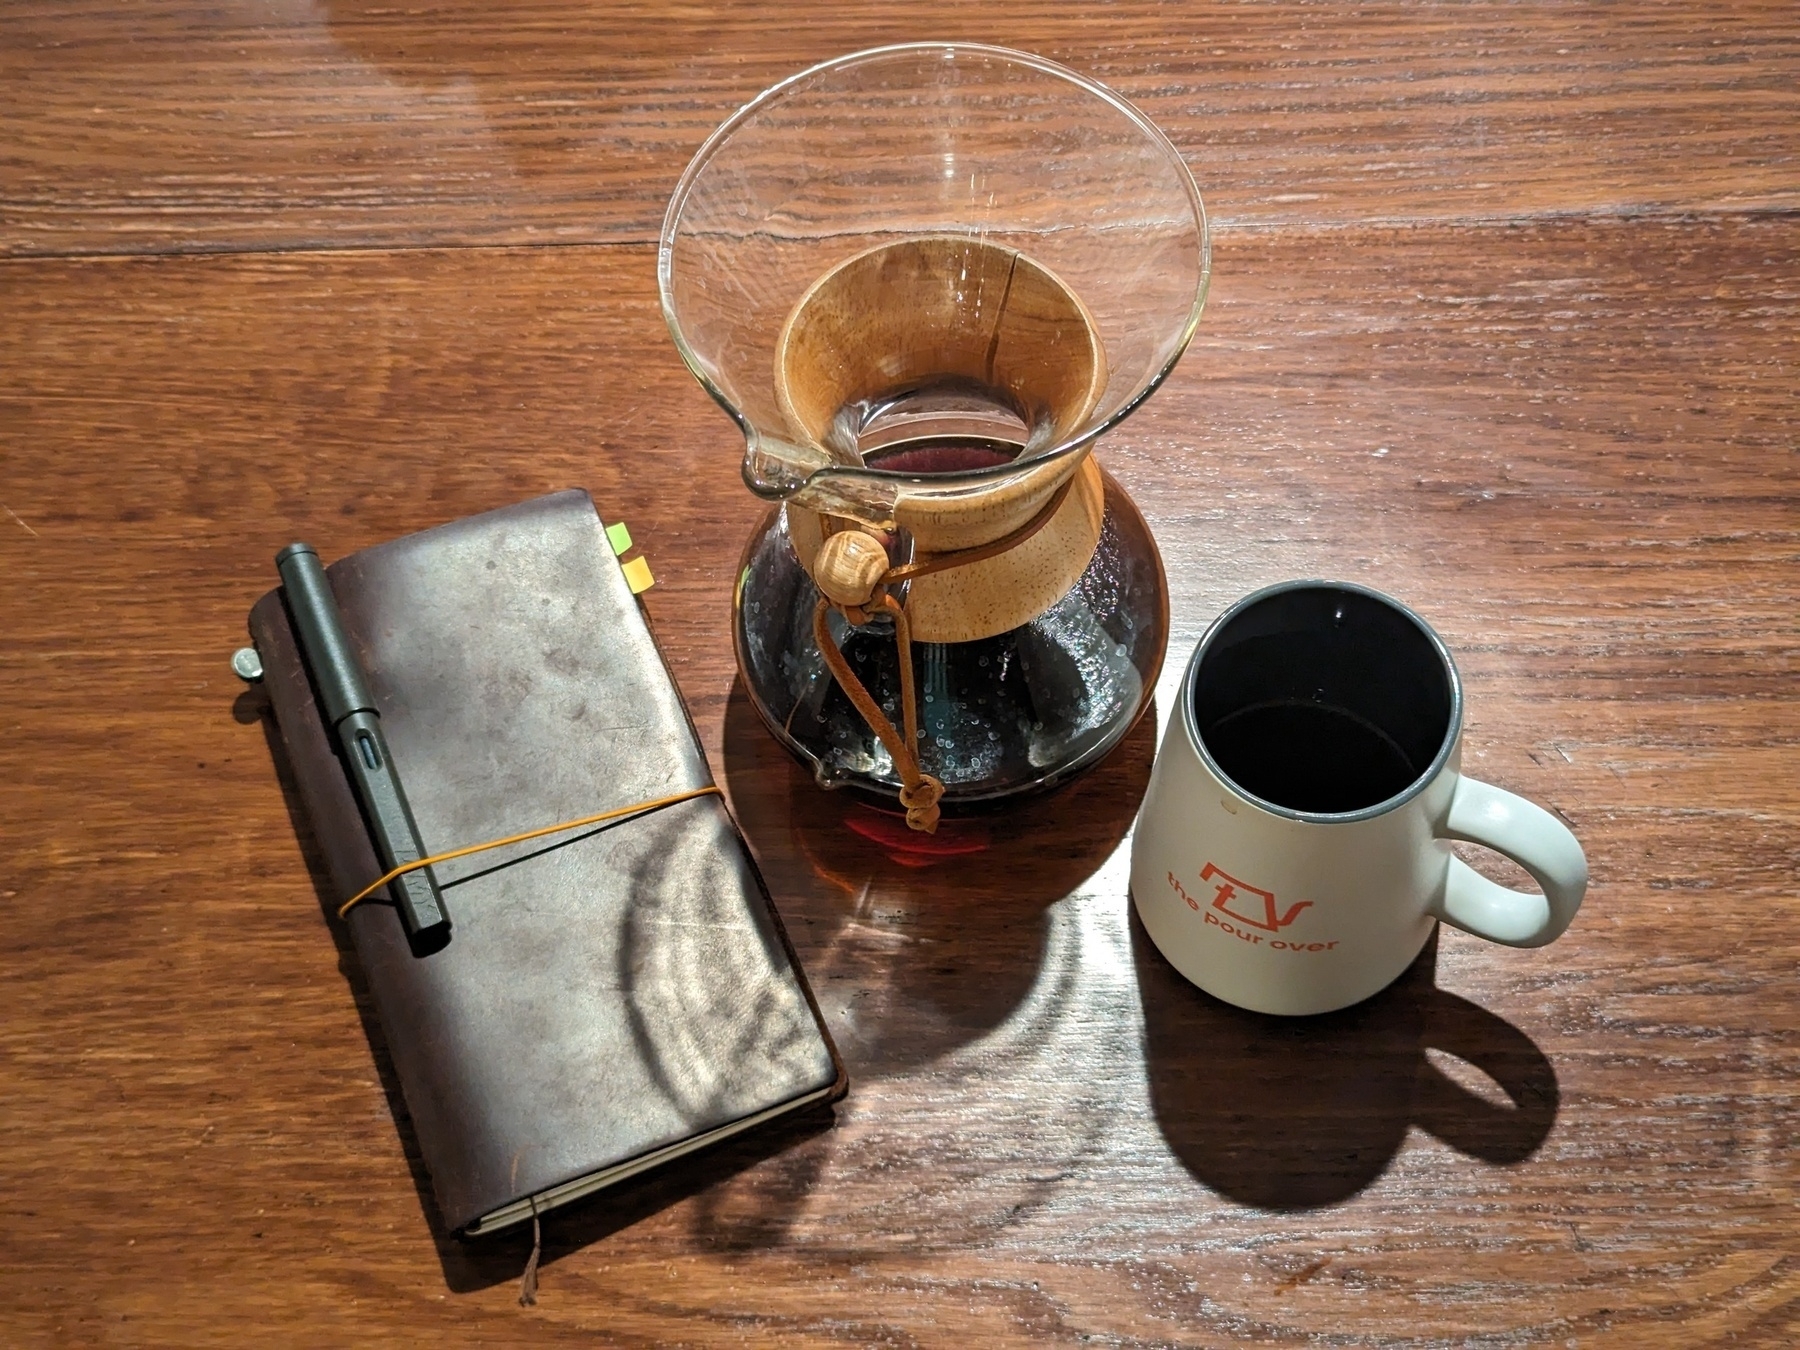 A brown leather journal with a black pen clipped on, a Chemex pour-over and a coffee mug sit atop a brown wooden table.